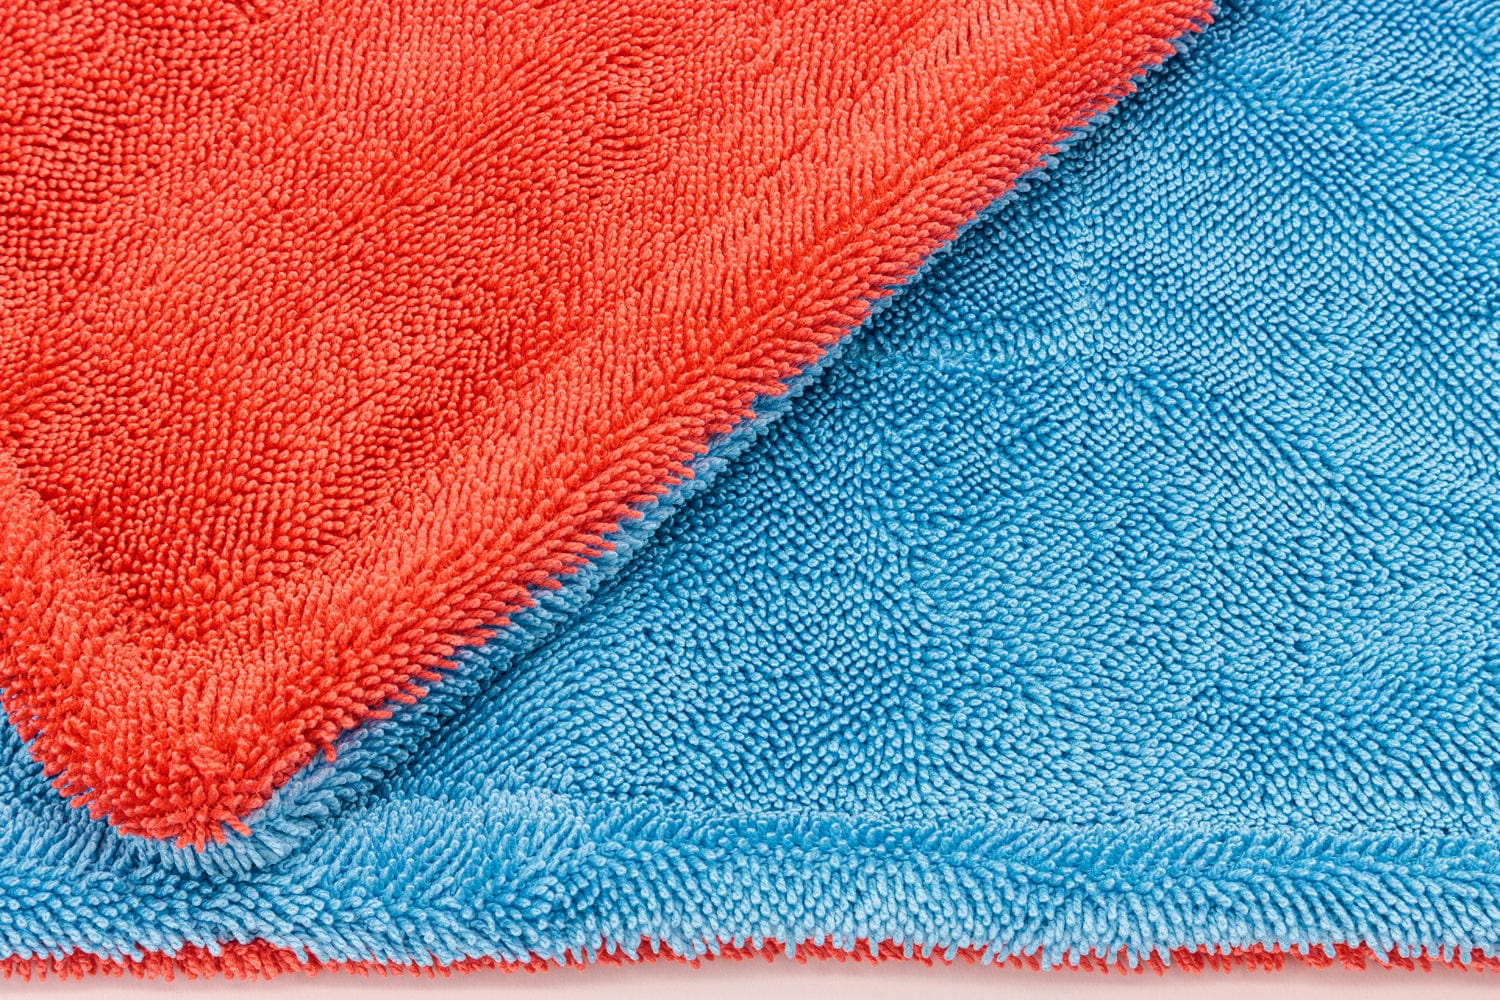 [Dreadnought] Microfiber Car-Drying Towel, Superior Absorbency for Drying  Cars, Trucks, and SUVs, Double-Twist Pile, One-Pass Vehicle-Drying Towel